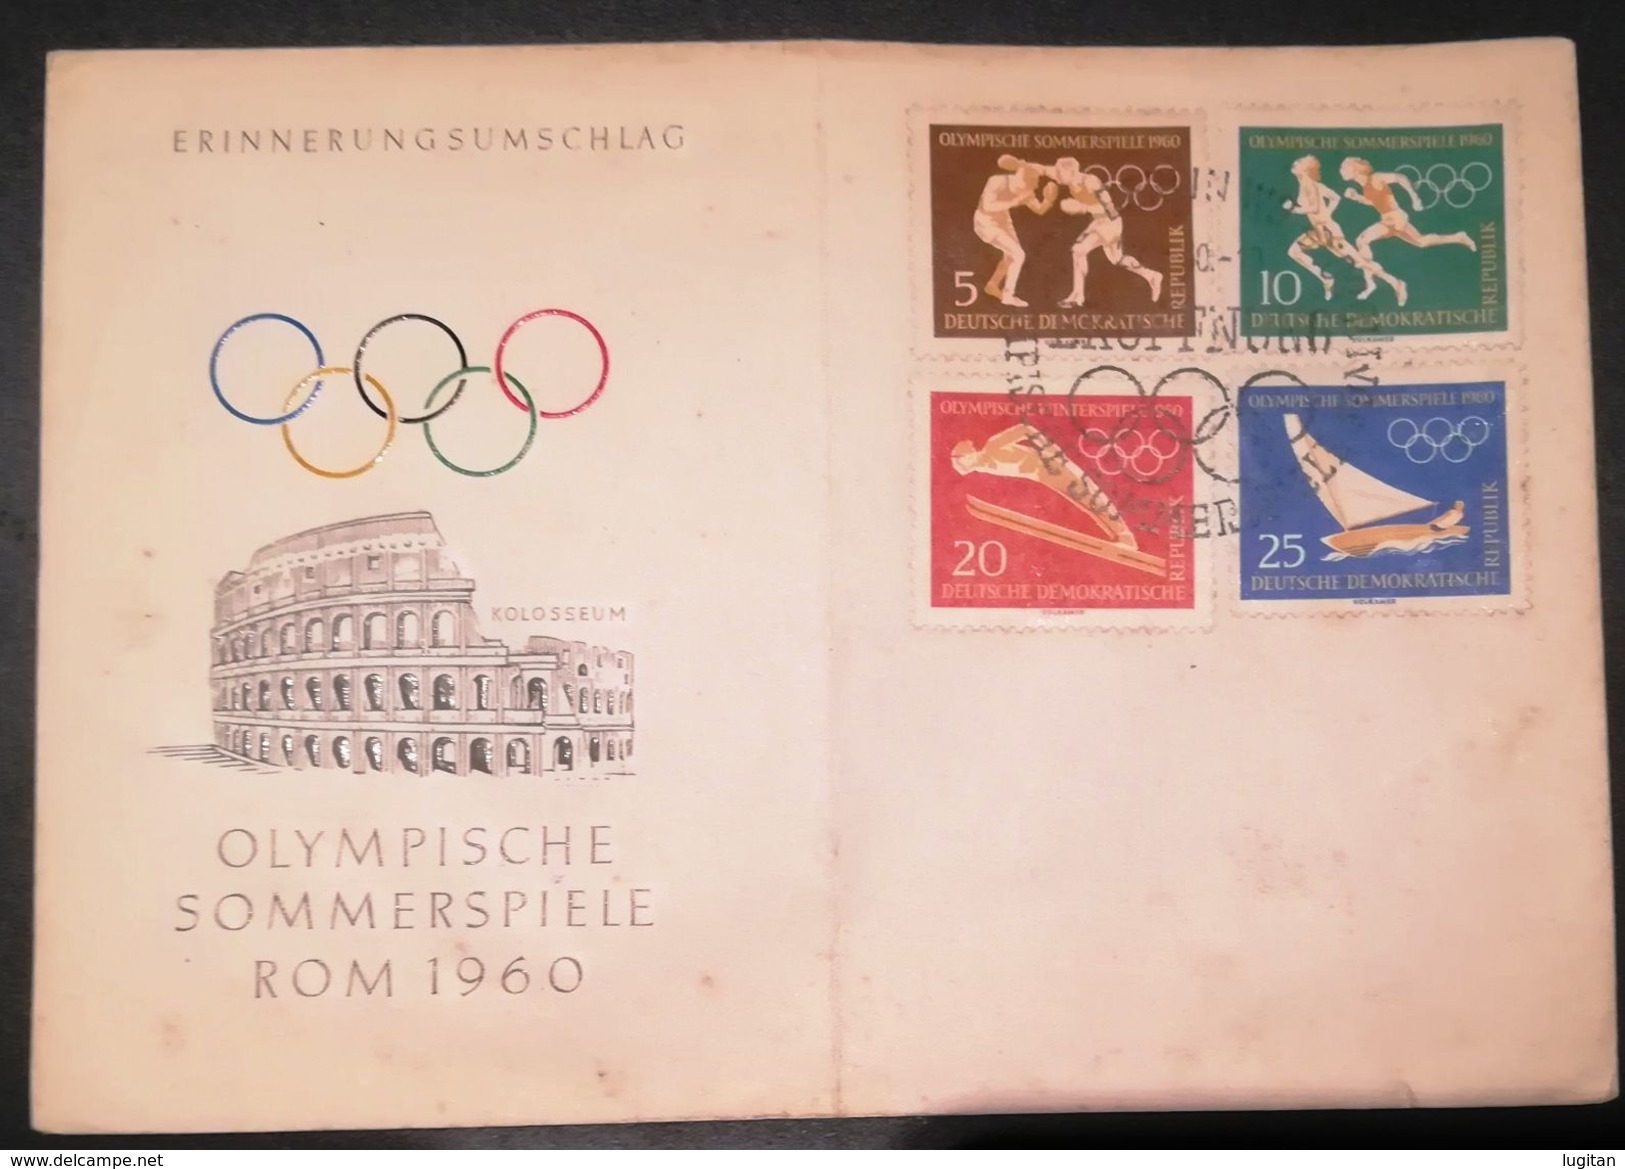 FILATELIA - TEMATICA SPORT - GERMANIA  DDR - GERMANY - OLIMPIADI INVERNALI SQUAW VALLEY - 1960 FDC - OLYMPIC GAMES - Hiver 1960: Squaw Valley